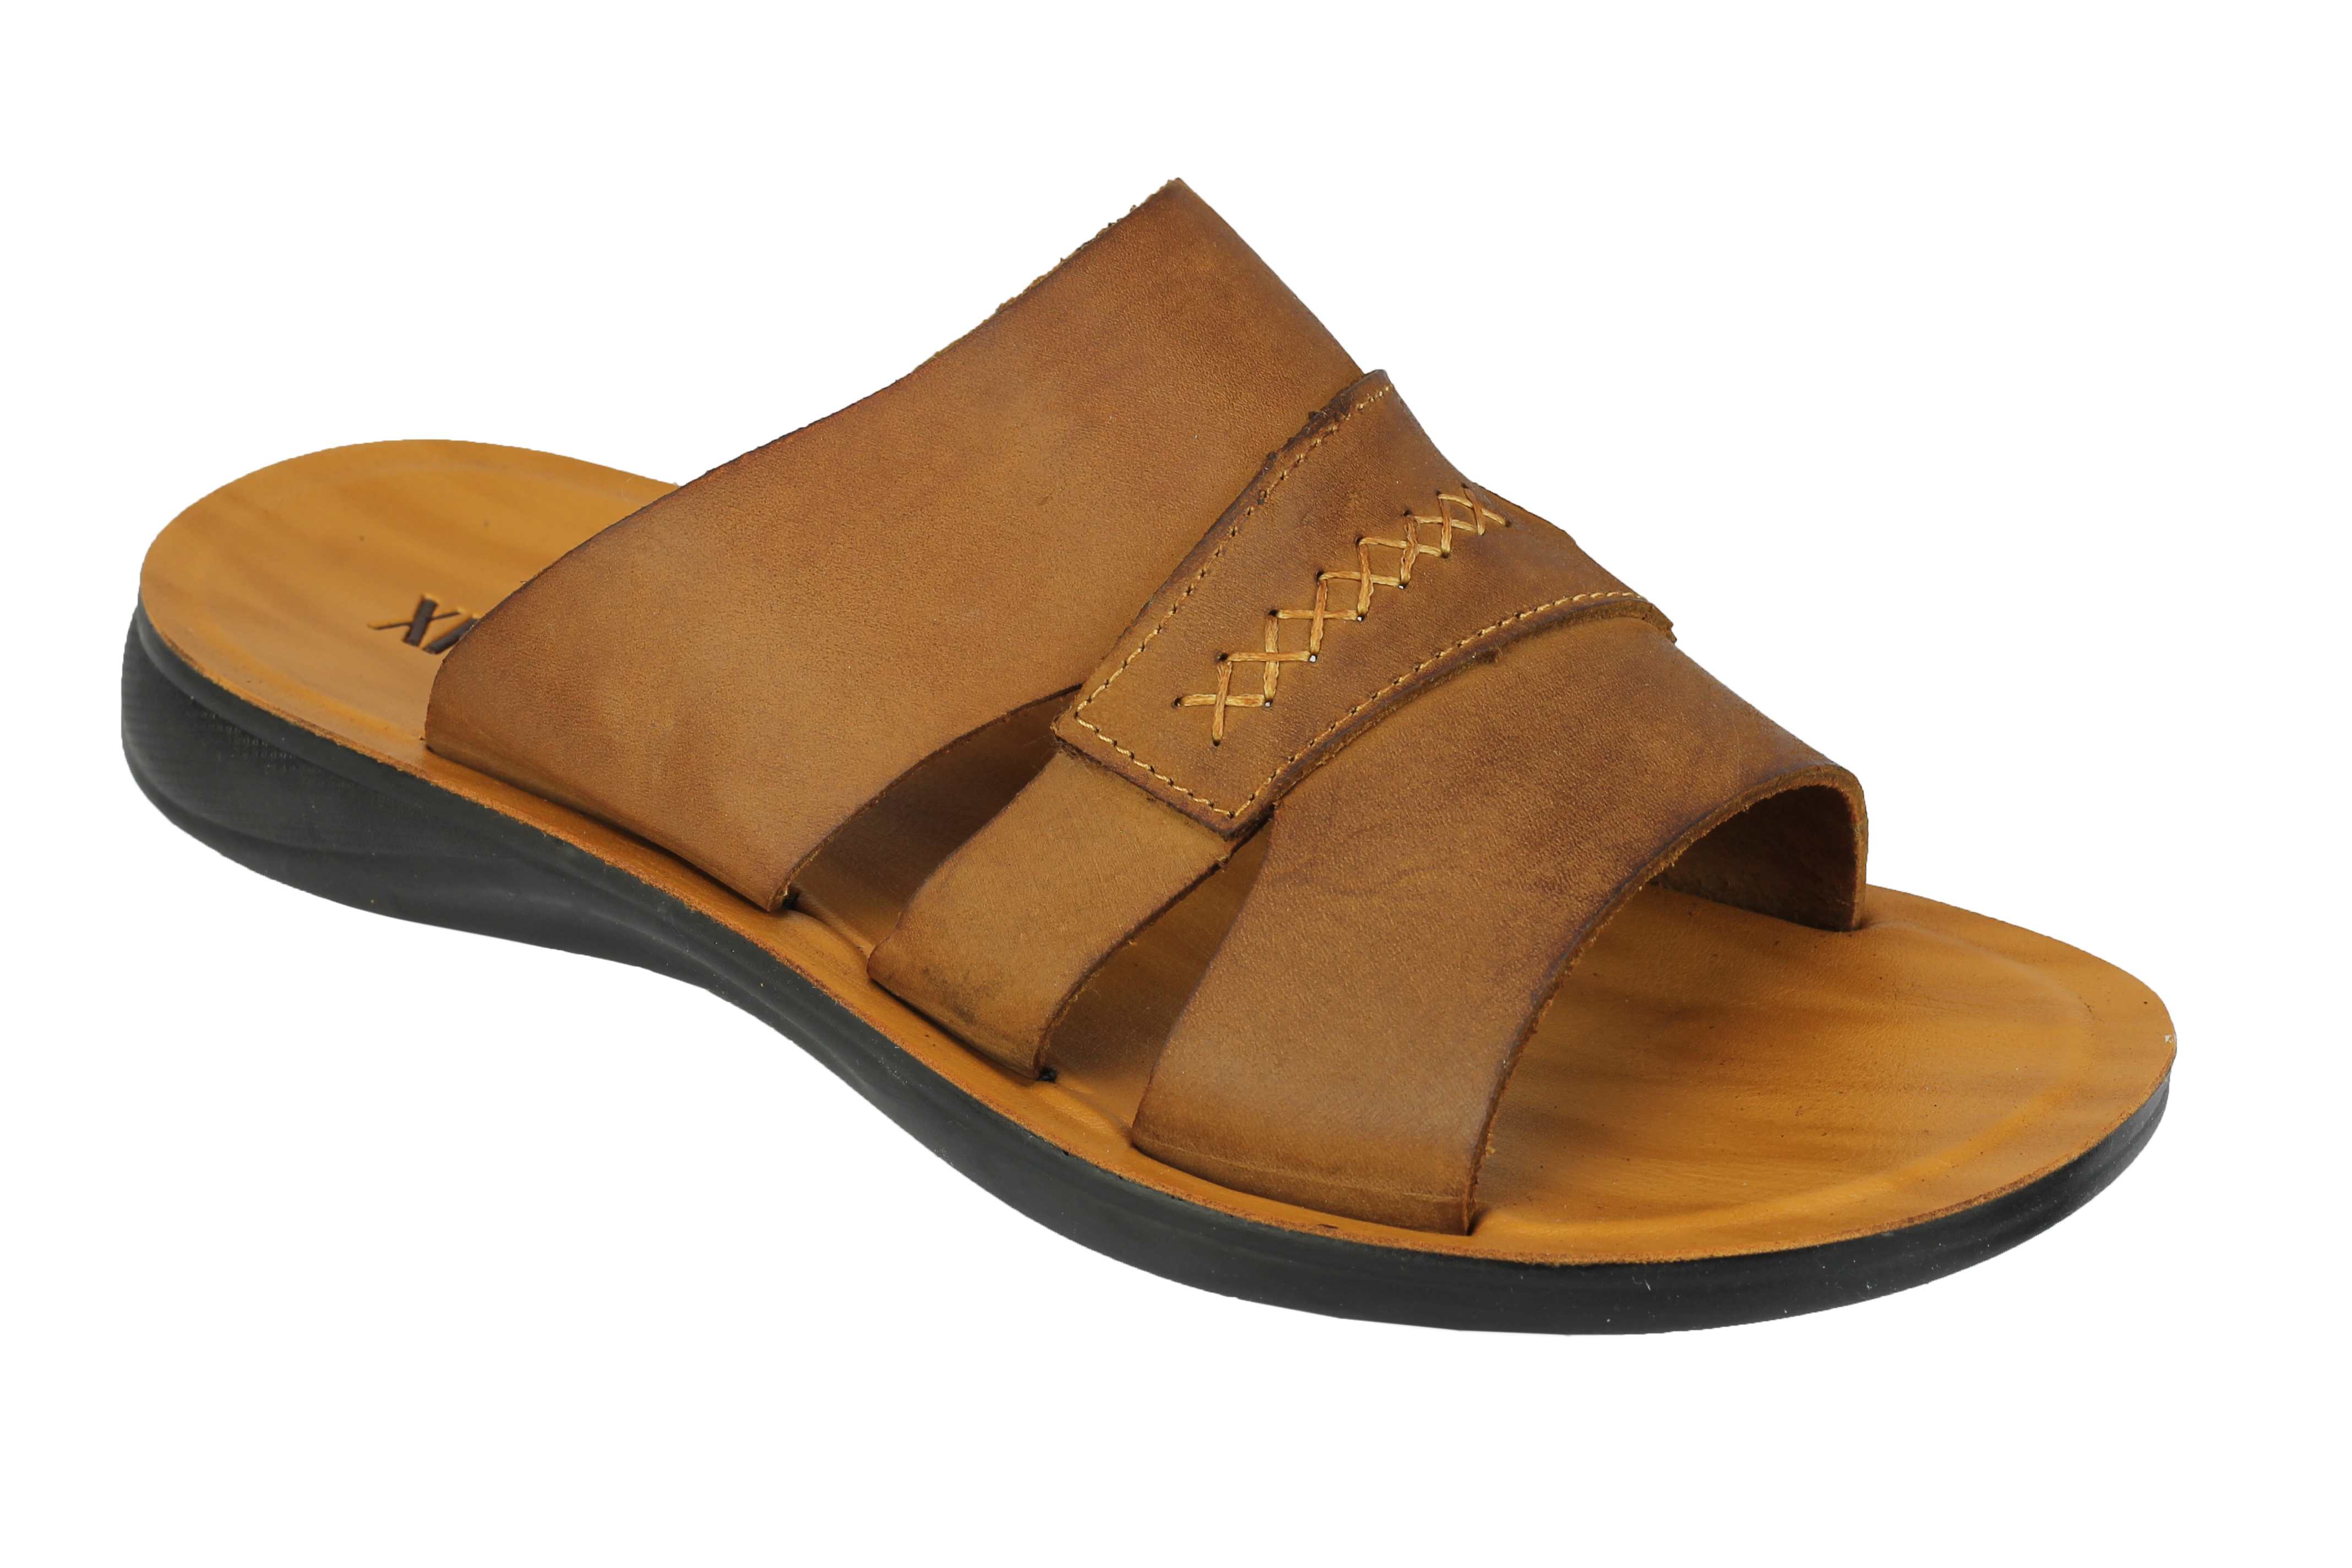 Mens Real Leather Sandals Slip on Summer Beach Walking Big Sizes Open Sliders 